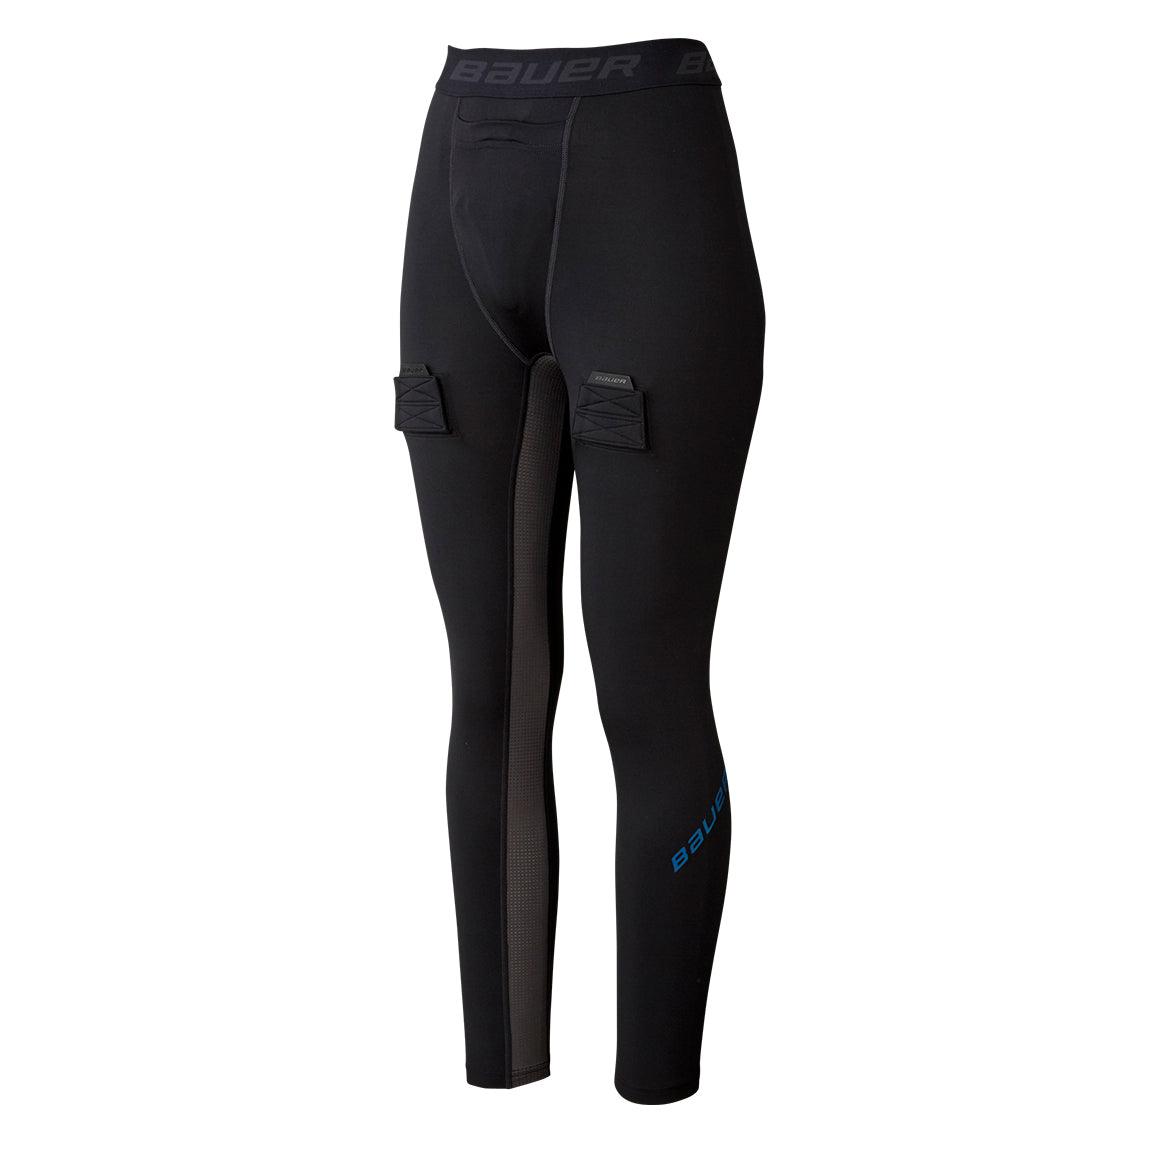 Women's Compression Jill Pant - Senior - Sports Excellence